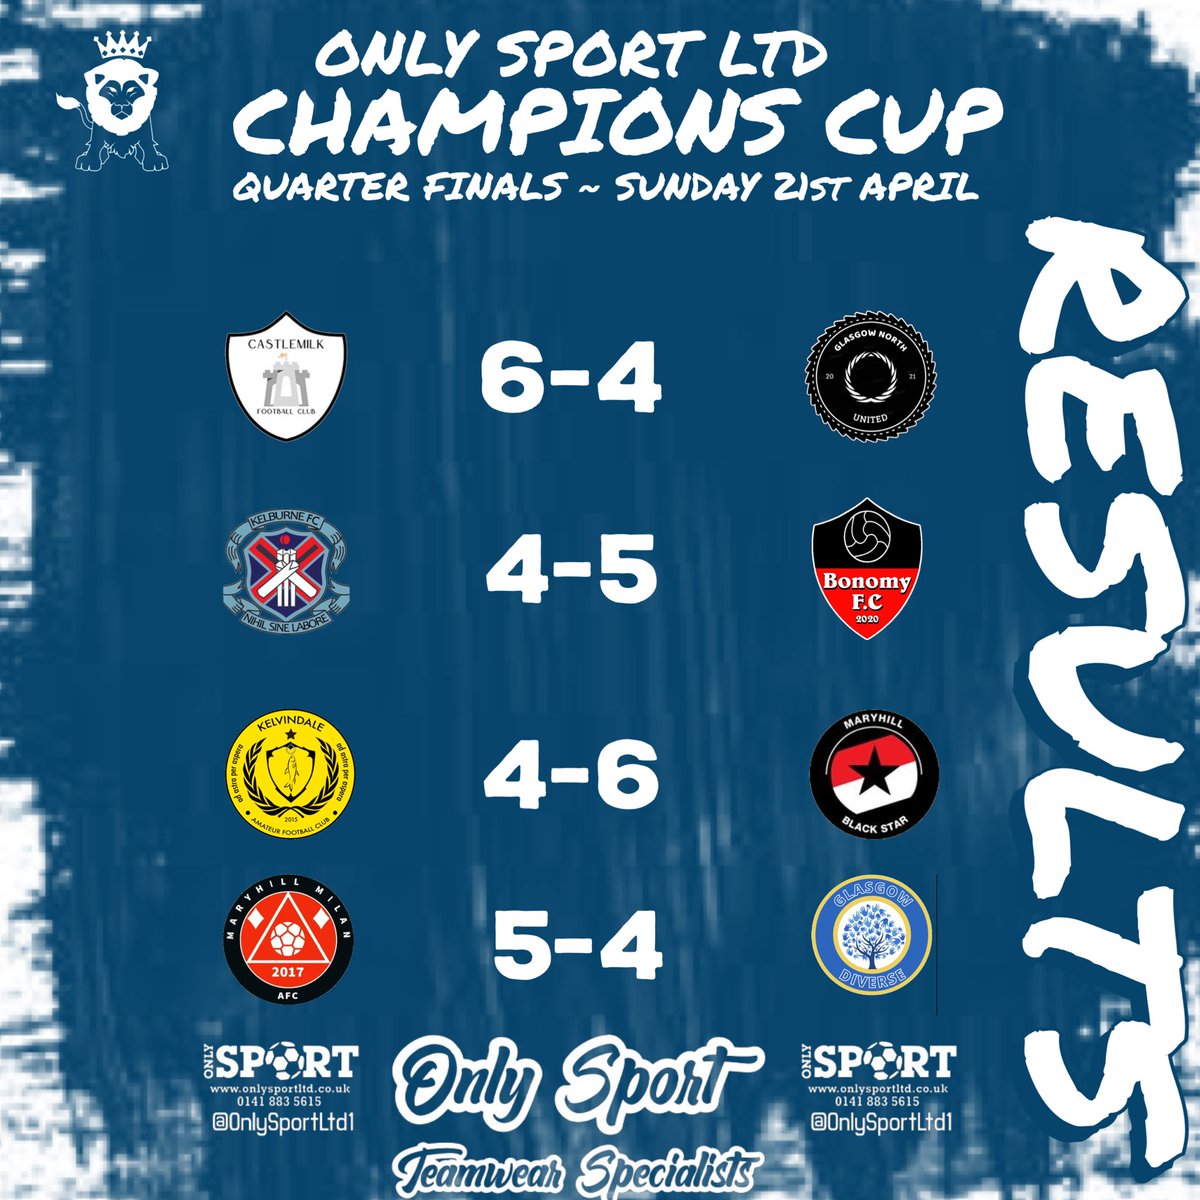 Today’s results from @OnlySportLTD1 Champions Cup QFs… goals galore!!! Congratulations to @CastlemilkFc @FcMaryhill @MBSFC @bonomyfc2020 on progressing to semi finals 👏👏👏 @ScotAmFA @scottish_aff @refsix @ftsc0res @SnJsFootyFocus